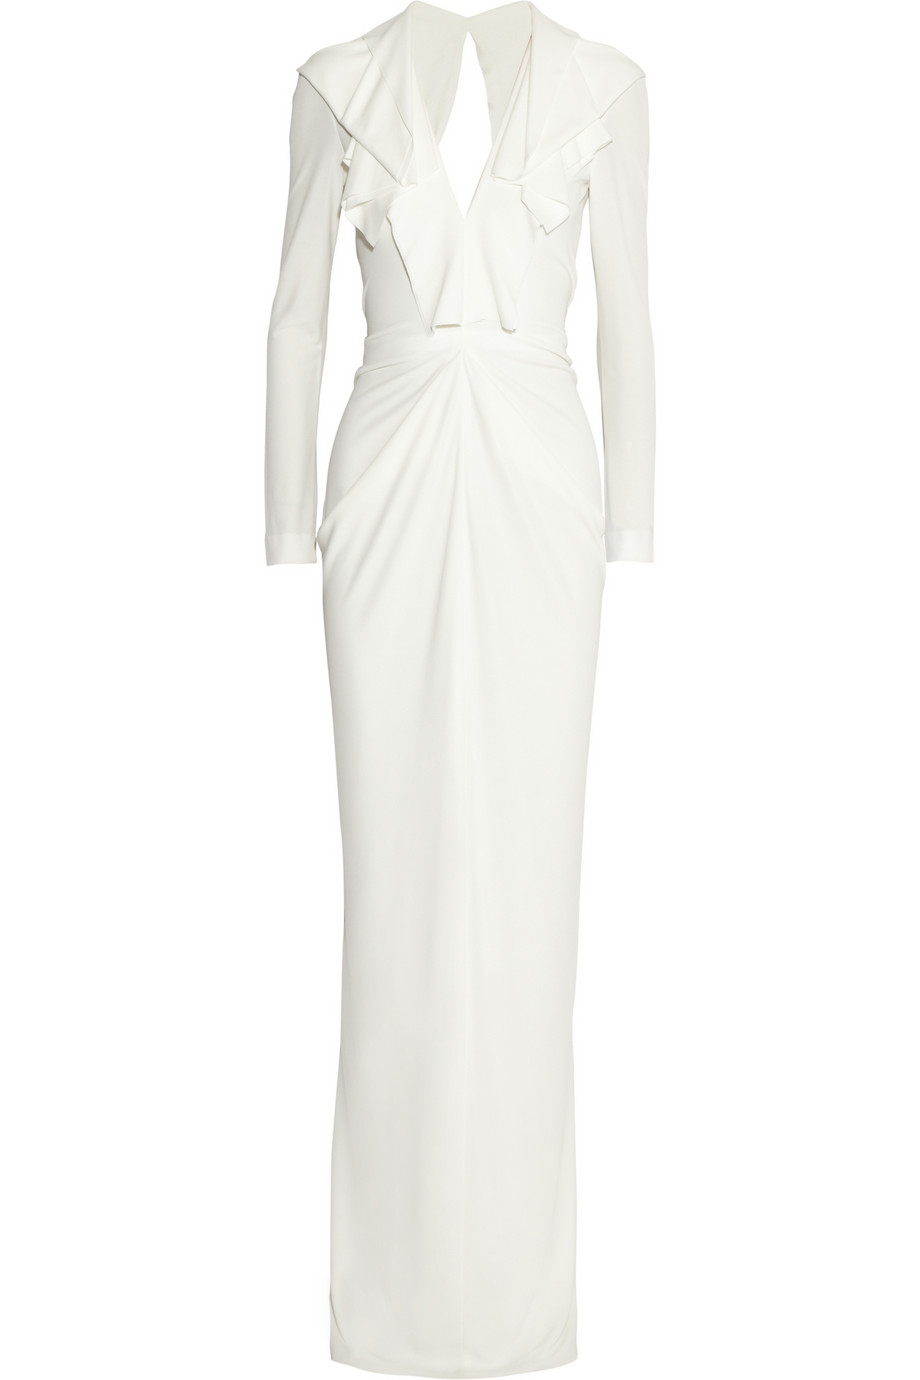 Roland Mouret Compeyson Ruffled Stretch Crepe Gown in White - Lyst